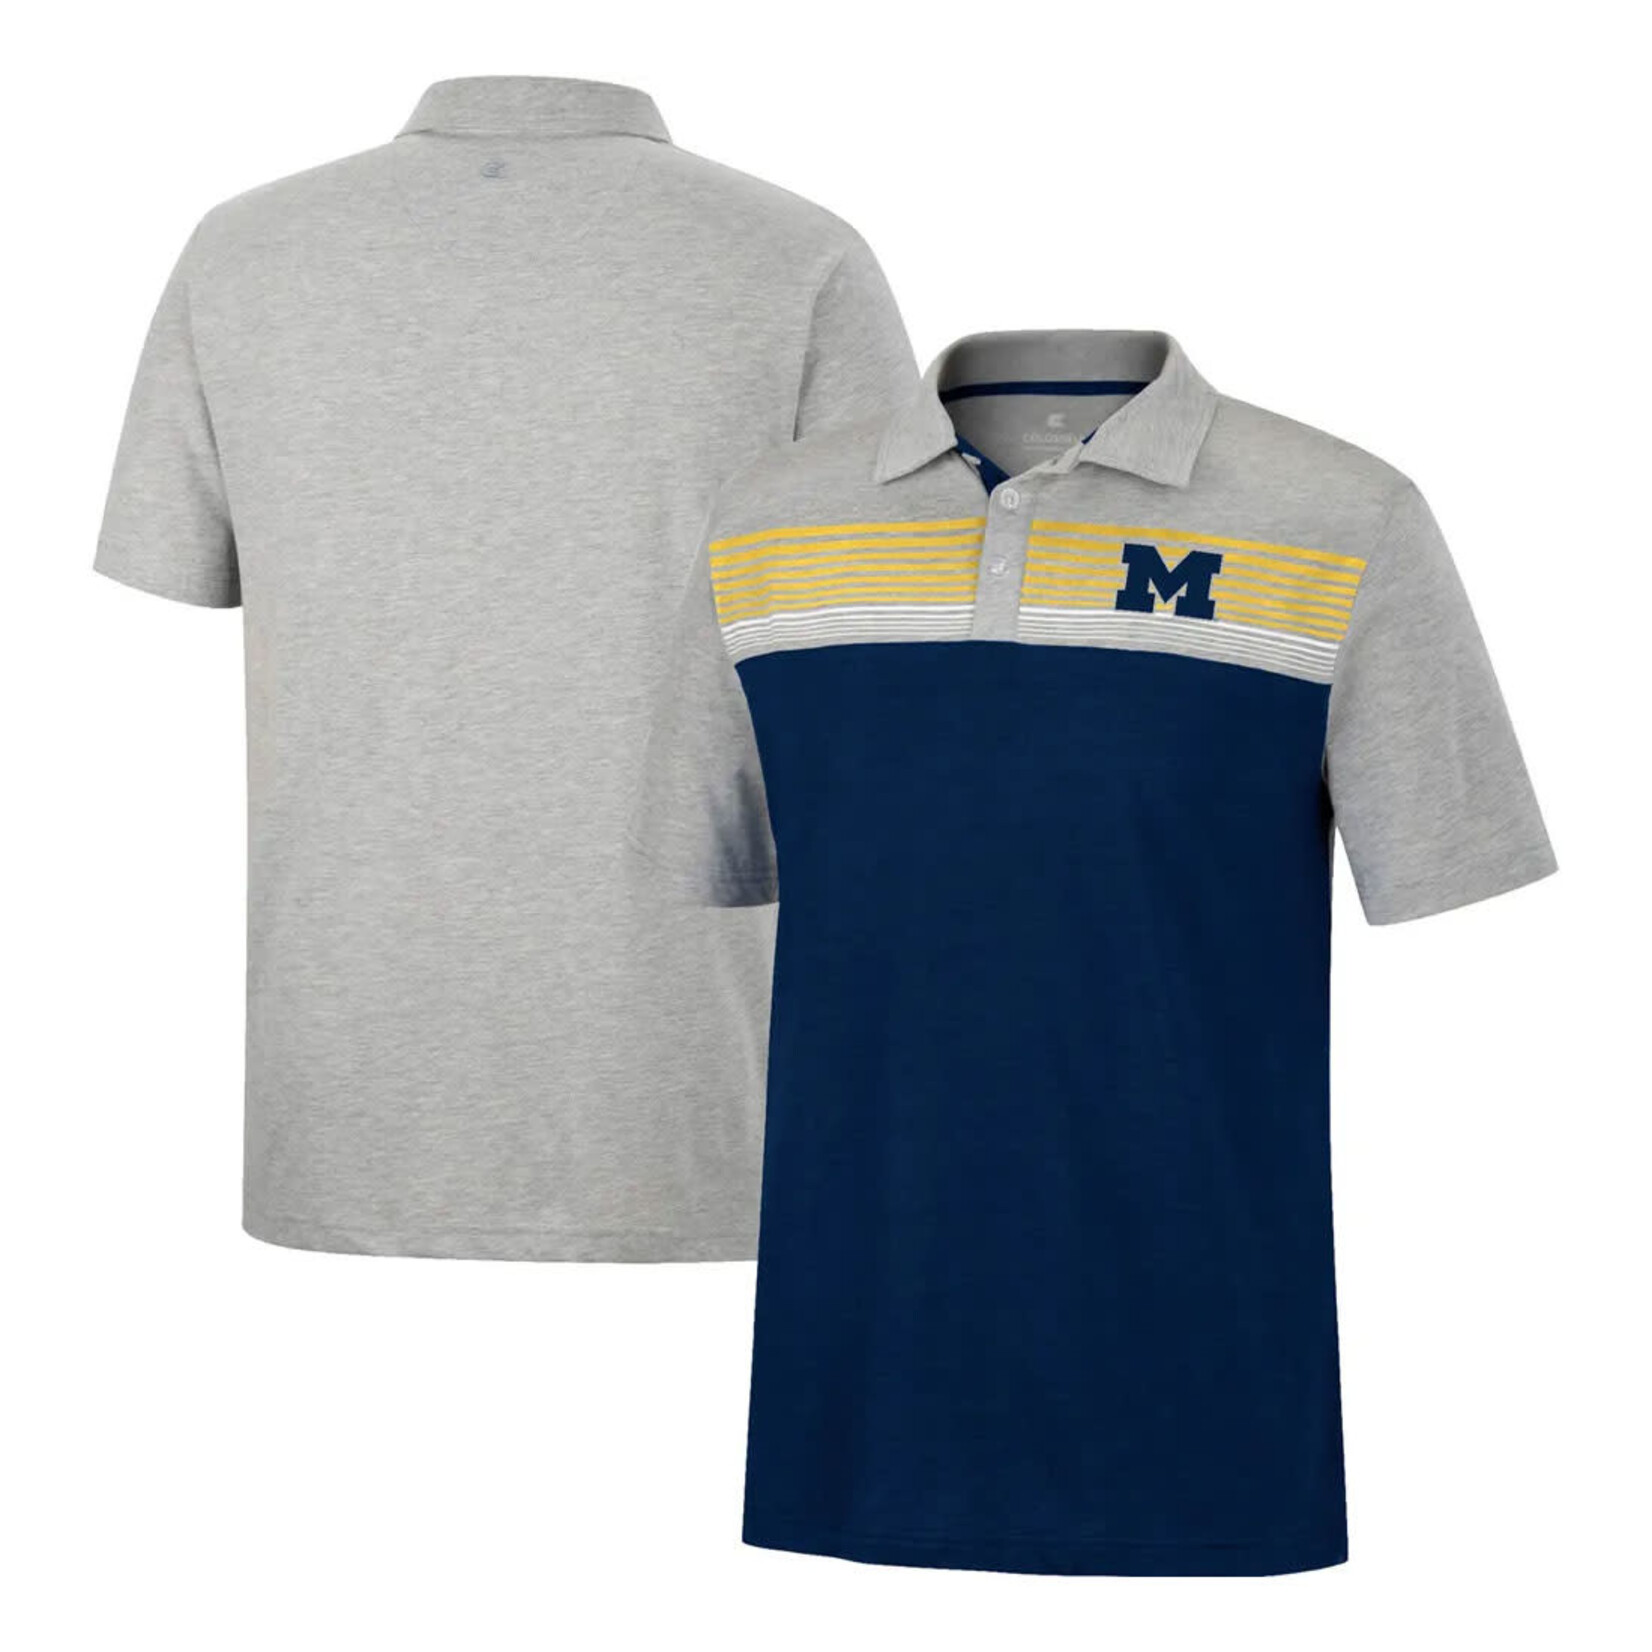 Colosseum Athletics NCAA Michigan Wolverines Colosseum Caddie Polo - Navy/Heathered Gray